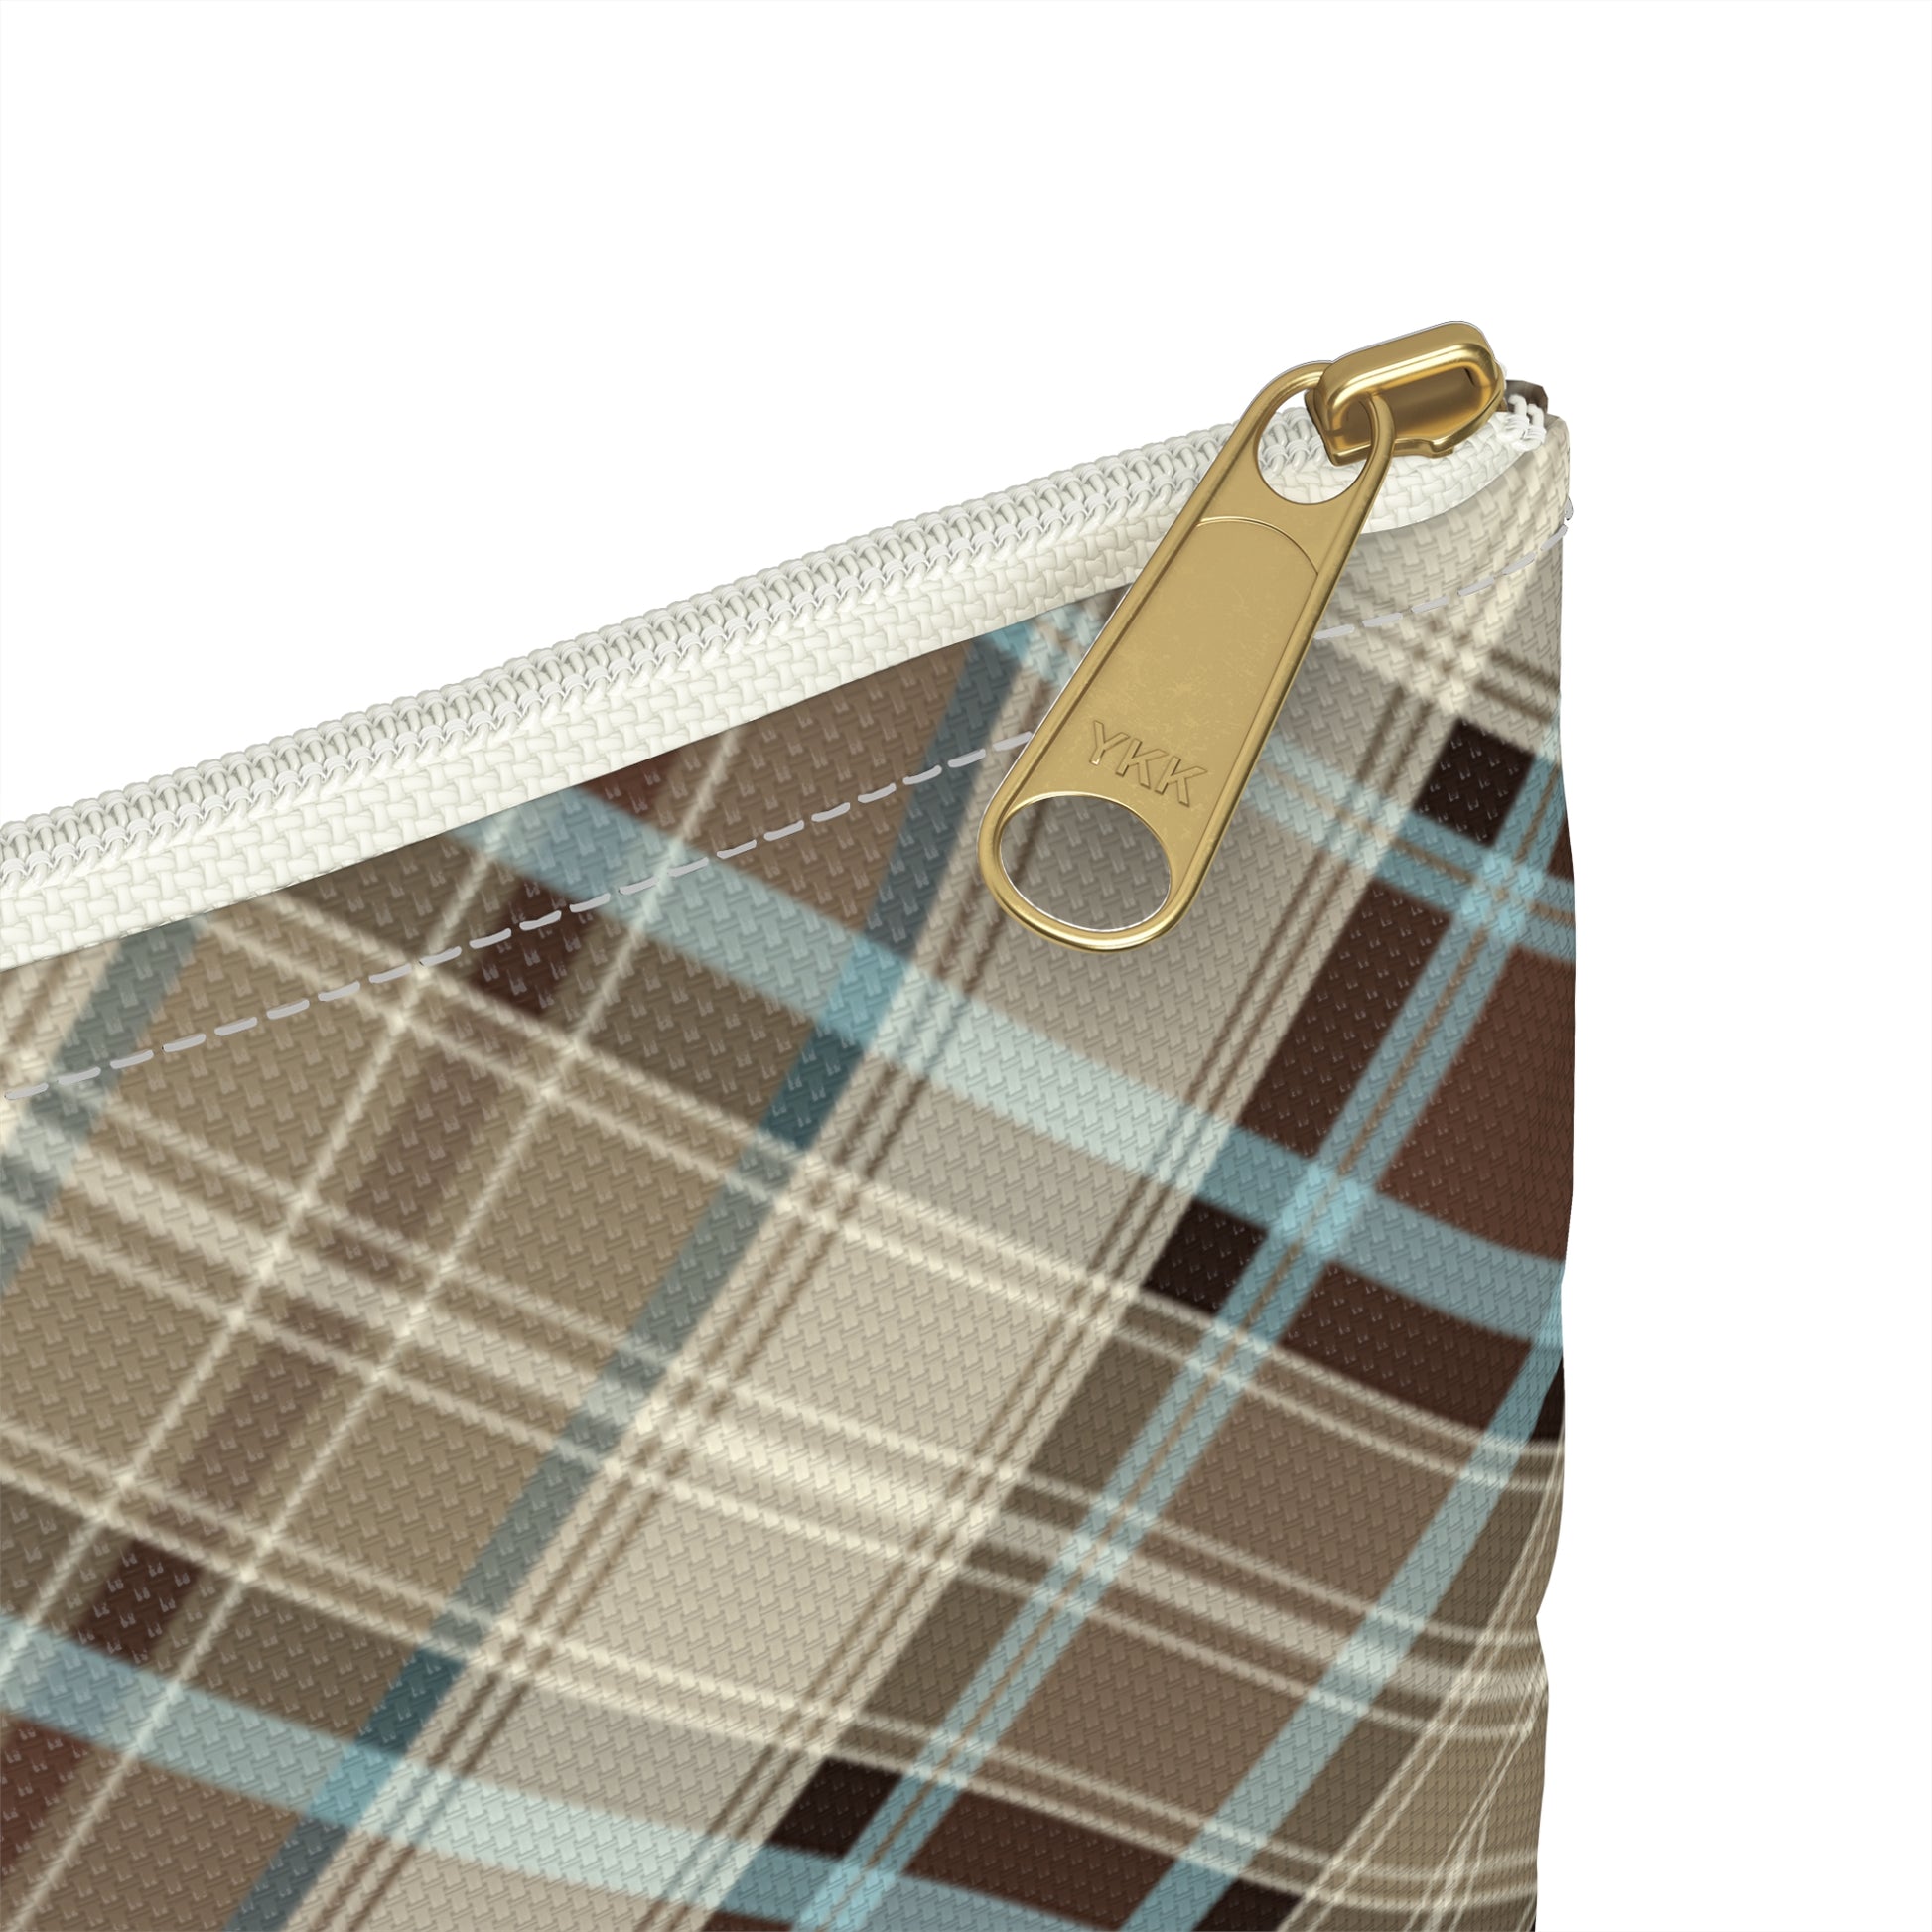 Scottish Plaid Pouch - The Global Wanderer